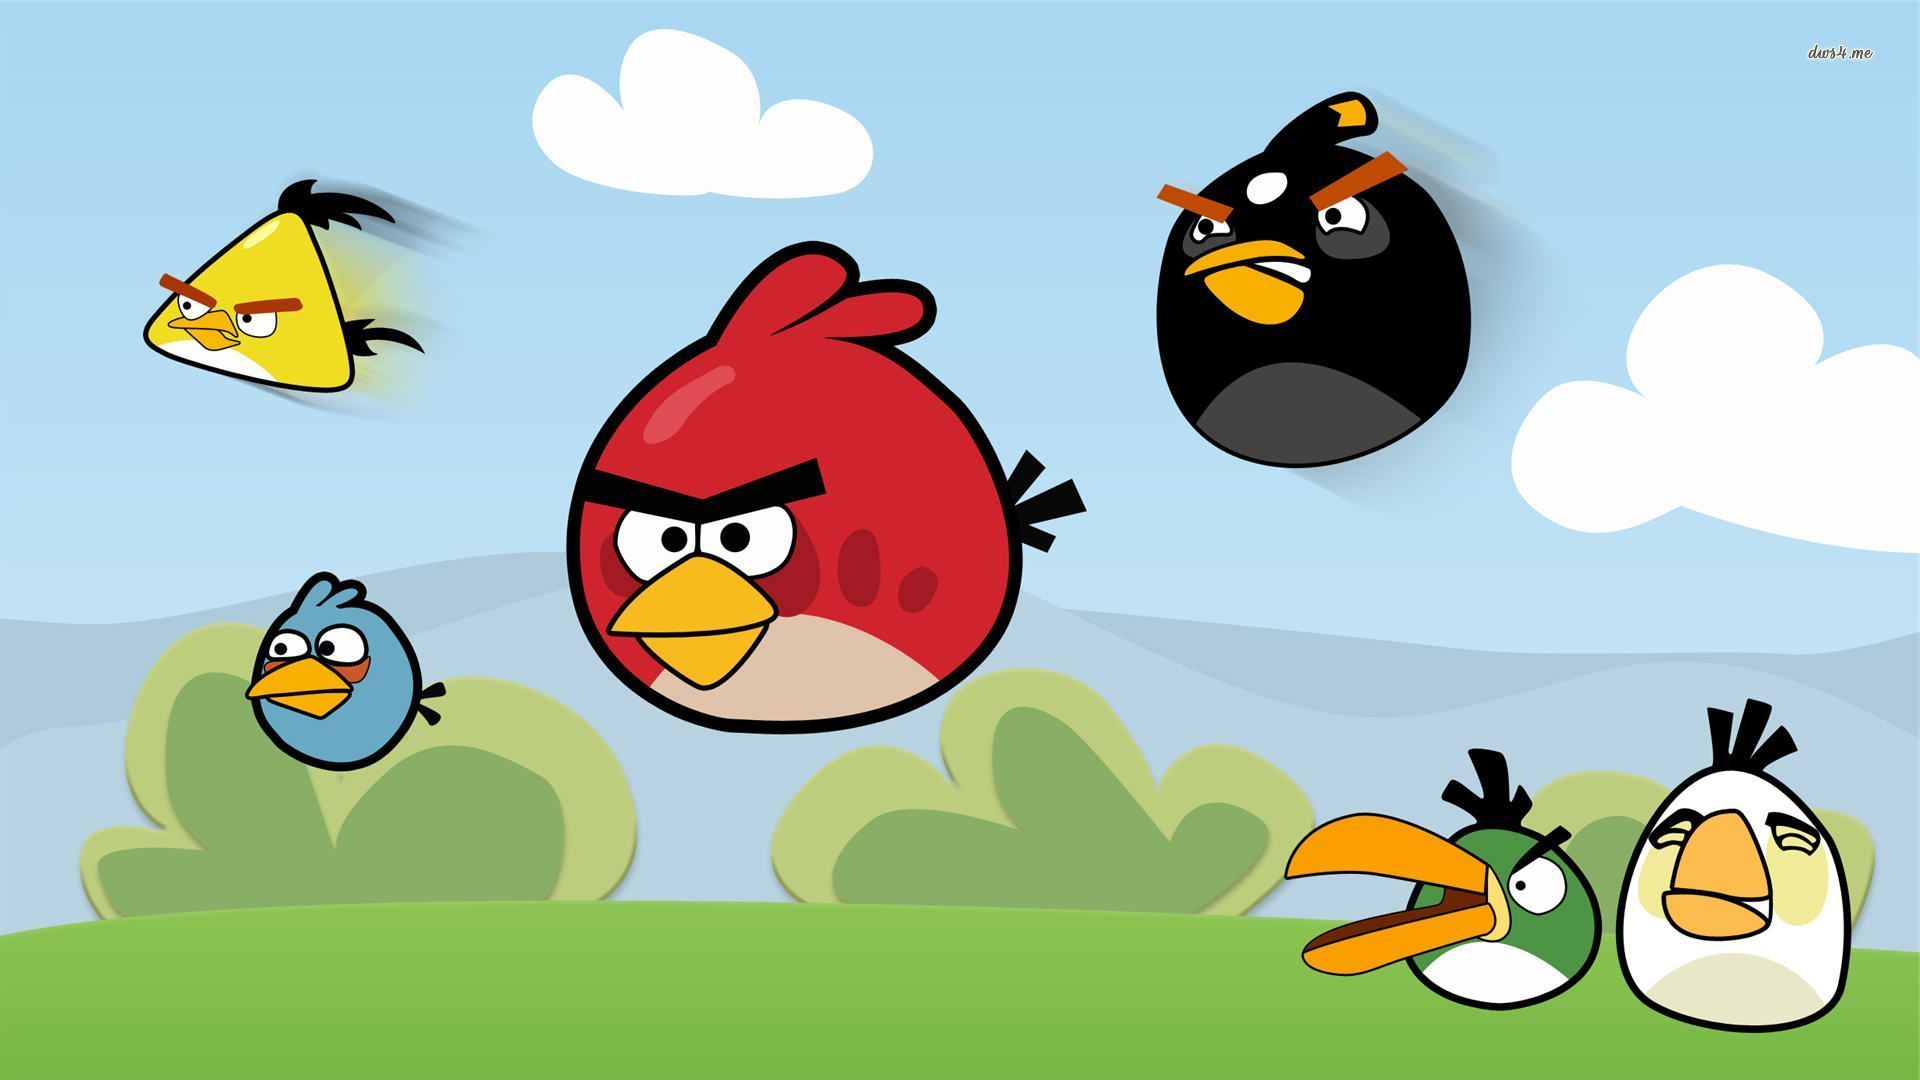 Free download Angry Bird Game Wallpaper 24180 HD Wallpaper in Games Imagecicom [1920x1080] for your Desktop, Mobile & Tablet. Explore Angry Birds Wallpaper HD. Angry Bird Wallpaper for Desktop